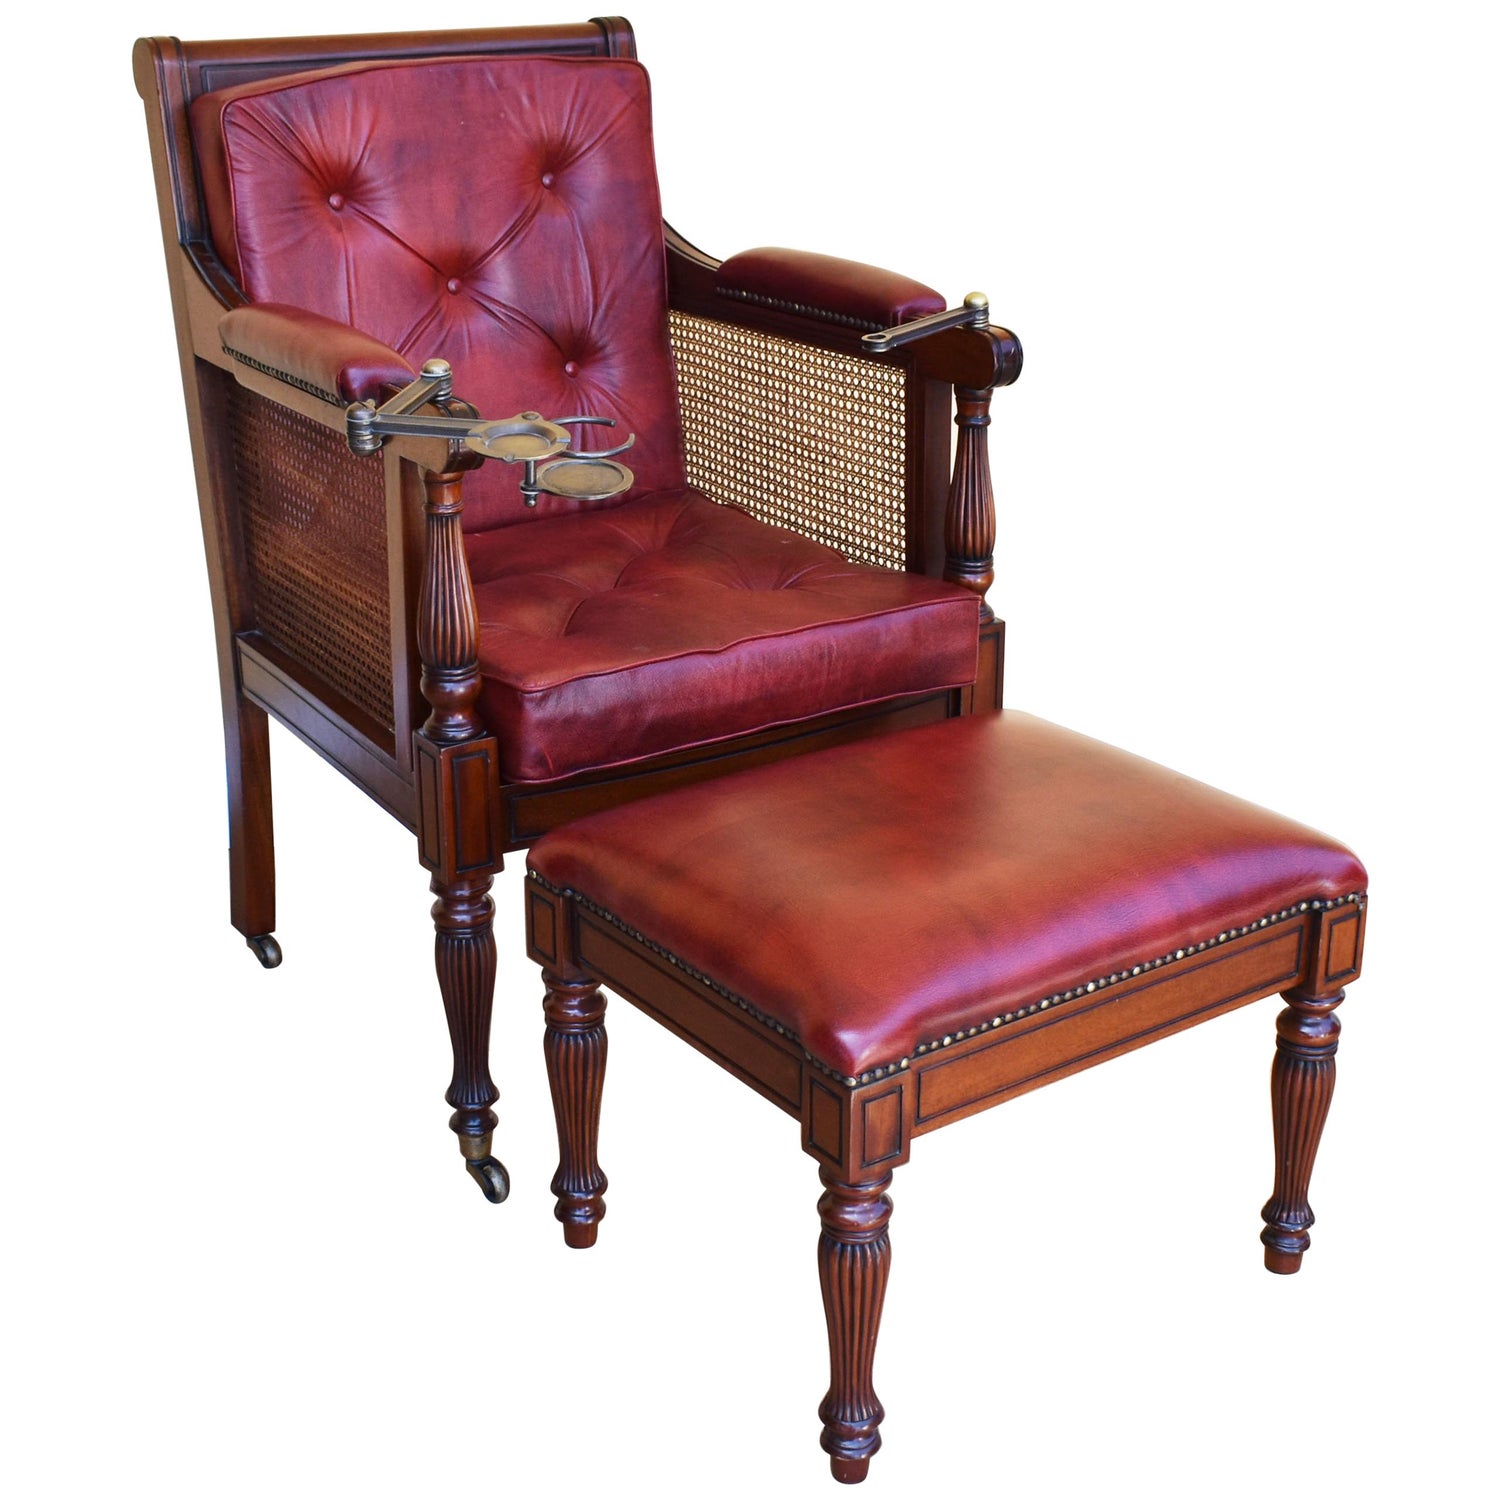 19th century regency style gentlemen’s leather armchair and stool